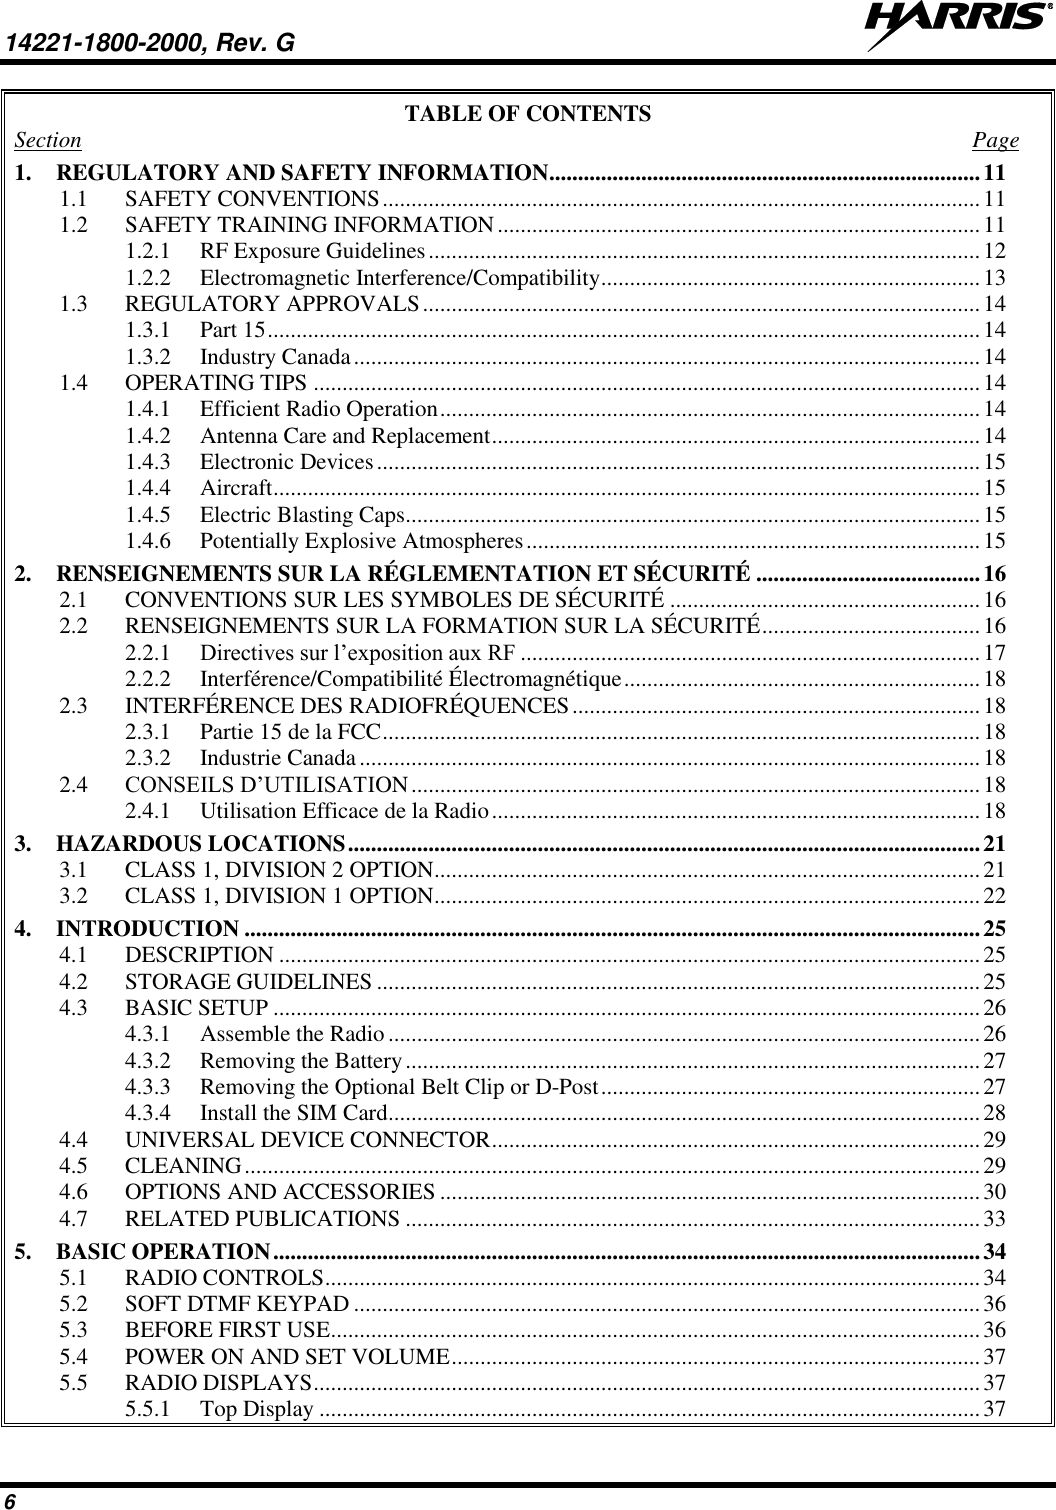 14221-1800-2000, Rev. G   6 TABLE OF CONTENTS Section  Page 1. REGULATORY AND SAFETY INFORMATION ........................................................................... 11 1.1 SAFETY CONVENTIONS ........................................................................................................ 11 1.2 SAFETY TRAINING INFORMATION .................................................................................... 11 1.2.1 RF Exposure Guidelines ................................................................................................ 12 1.2.2 Electromagnetic Interference/Compatibility .................................................................. 13 1.3 REGULATORY APPROVALS ................................................................................................. 14 1.3.1 Part 15 ............................................................................................................................ 14 1.3.2 Industry Canada ............................................................................................................. 14 1.4 OPERATING TIPS .................................................................................................................... 14 1.4.1 Efficient Radio Operation .............................................................................................. 14 1.4.2 Antenna Care and Replacement ..................................................................................... 14 1.4.3 Electronic Devices ......................................................................................................... 15 1.4.4 Aircraft ........................................................................................................................... 15 1.4.5 Electric Blasting Caps .................................................................................................... 15 1.4.6 Potentially Explosive Atmospheres ............................................................................... 15 2. RENSEIGNEMENTS SUR LA RÉGLEMENTATION ET SÉCURITÉ ....................................... 16 2.1 CONVENTIONS SUR LES SYMBOLES DE SÉCURITÉ ...................................................... 16 2.2 RENSEIGNEMENTS SUR LA FORMATION SUR LA SÉCURITÉ ...................................... 16 2.2.1 Directives sur l’exposition aux RF ................................................................................ 17 2.2.2 Interférence/Compatibilité Électromagnétique .............................................................. 18 2.3 INTERFÉRENCE DES RADIOFRÉQUENCES ....................................................................... 18 2.3.1 Partie 15 de la FCC ........................................................................................................ 18 2.3.2 Industrie Canada ............................................................................................................ 18 2.4 CONSEILS D’UTILISATION ................................................................................................... 18 2.4.1 Utilisation Efficace de la Radio ..................................................................................... 18 3. HAZARDOUS LOCATIONS .............................................................................................................. 21 3.1 CLASS 1, DIVISION 2 OPTION ............................................................................................... 21 3.2 CLASS 1, DIVISION 1 OPTION ............................................................................................... 22 4. INTRODUCTION ................................................................................................................................ 25 4.1 DESCRIPTION .......................................................................................................................... 25 4.2 STORAGE GUIDELINES ......................................................................................................... 25 4.3 BASIC SETUP ........................................................................................................................... 26 4.3.1 Assemble the Radio ....................................................................................................... 26 4.3.2 Removing the Battery .................................................................................................... 27 4.3.3 Removing the Optional Belt Clip or D-Post .................................................................. 27 4.3.4 Install the SIM Card ....................................................................................................... 28 4.4 UNIVERSAL DEVICE CONNECTOR ..................................................................................... 29 4.5 CLEANING ................................................................................................................................ 29 4.6 OPTIONS AND ACCESSORIES .............................................................................................. 30 4.7 RELATED PUBLICATIONS .................................................................................................... 33 5. BASIC OPERATION ........................................................................................................................... 34 5.1 RADIO CONTROLS .................................................................................................................. 34 5.2 SOFT DTMF KEYPAD ............................................................................................................. 36 5.3 BEFORE FIRST USE ................................................................................................................. 36 5.4 POWER ON AND SET VOLUME ............................................................................................ 37 5.5 RADIO DISPLAYS .................................................................................................................... 37 5.5.1 Top Display ................................................................................................................... 37 